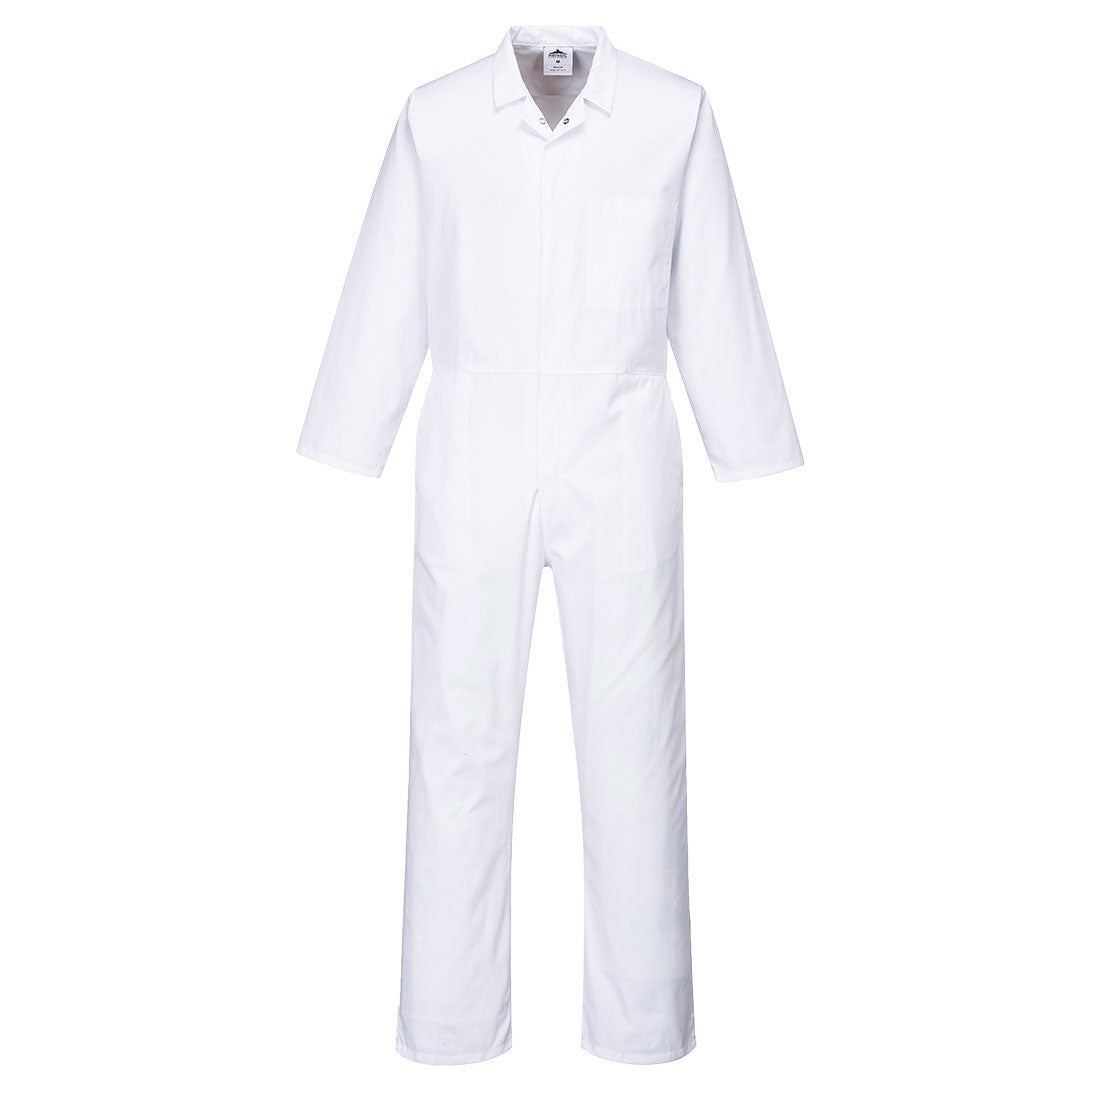 Portwest 2201 - White Food Industry Coverall Boiler Suit sz Large Regular